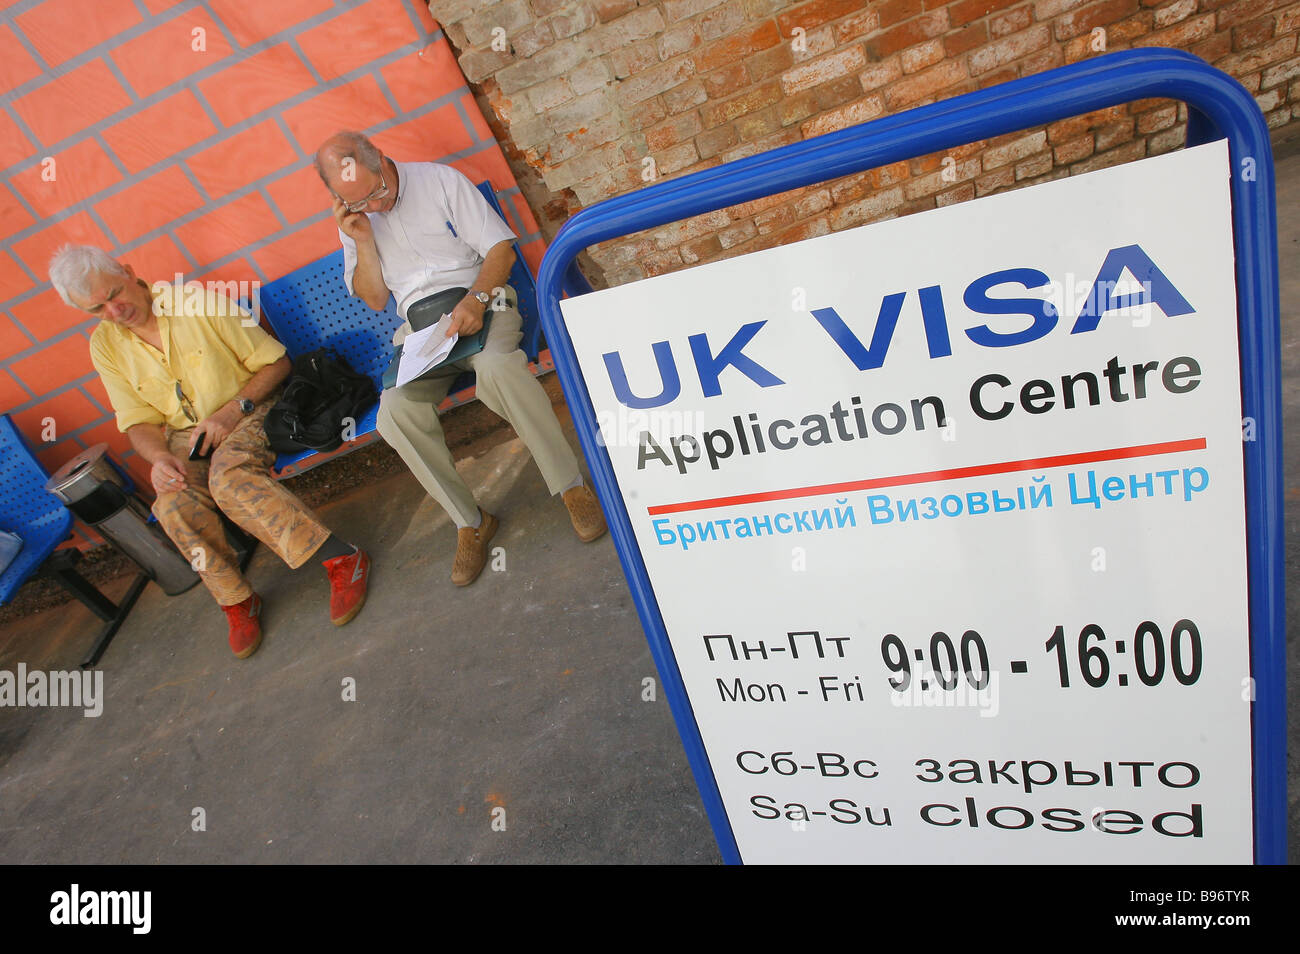 Office of the Moscow Visa Application Center of the British Embassy Stock  Photo - Alamy